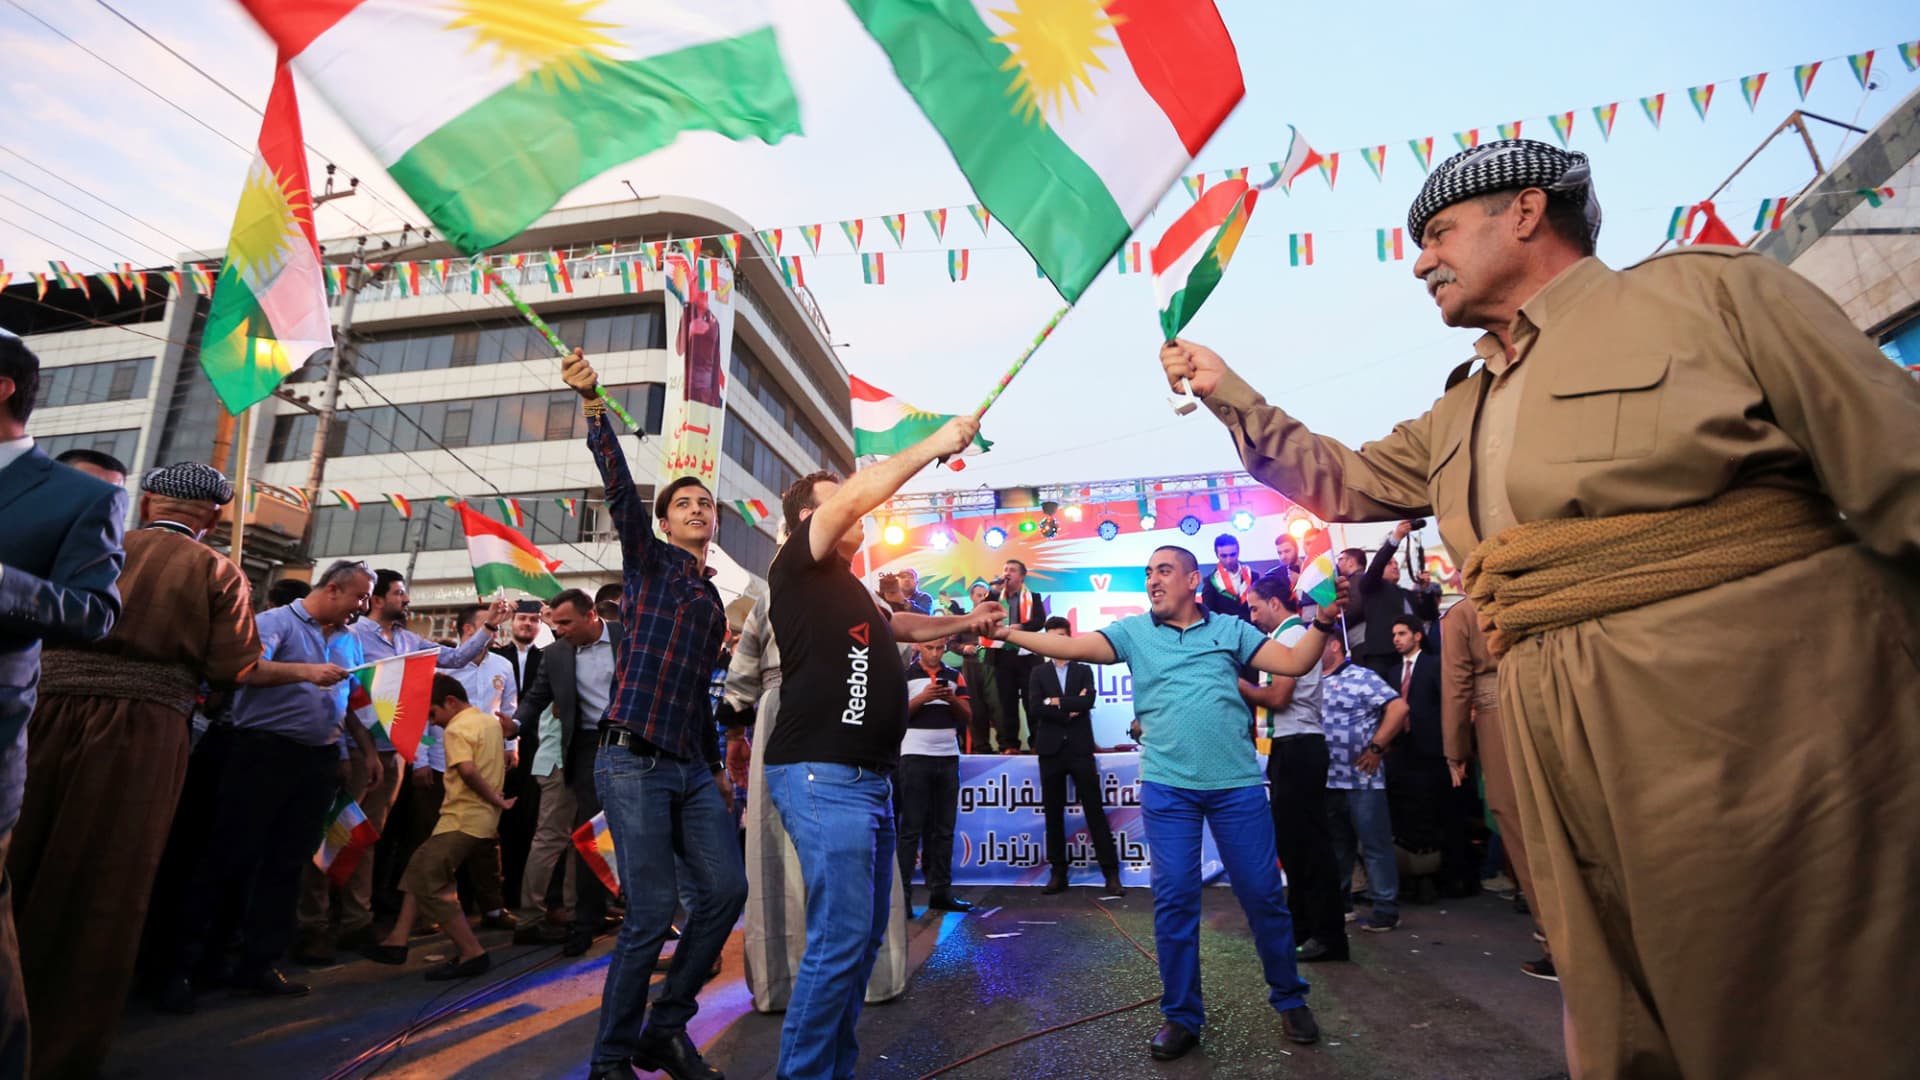 Kurds celebrate to show their support for the independence referendum in Duhok, Iraq, September 26, 2017.